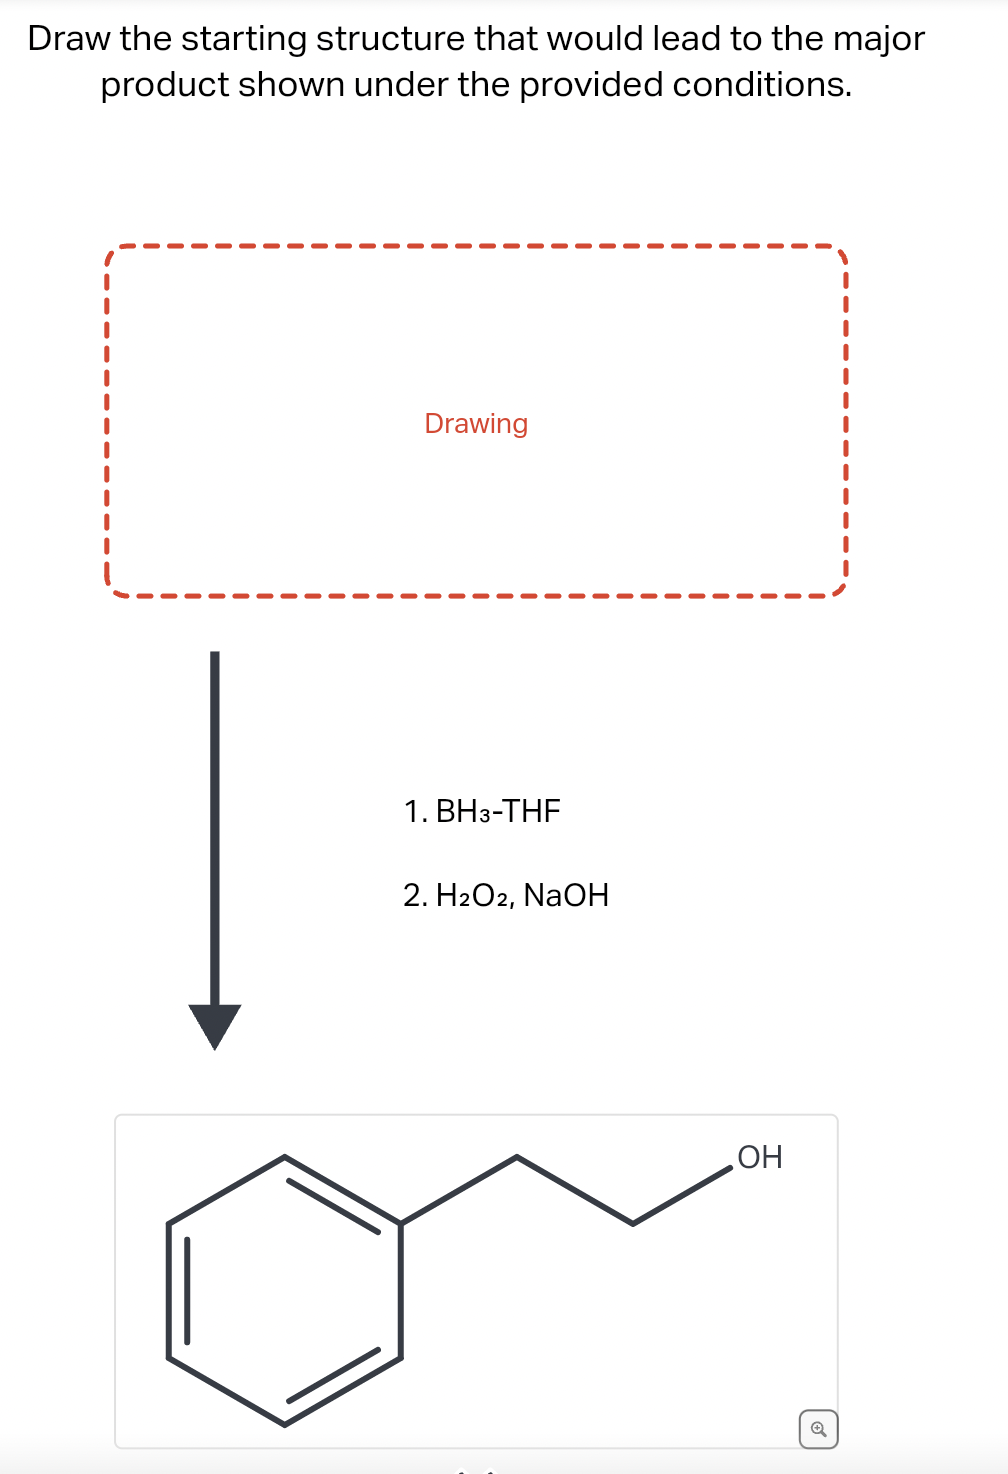 Draw the starting structure that would lead to the major
product shown under the provided conditions.
Drawing
1. BH3-THF
2. H2O2, NaOH
OH
✓